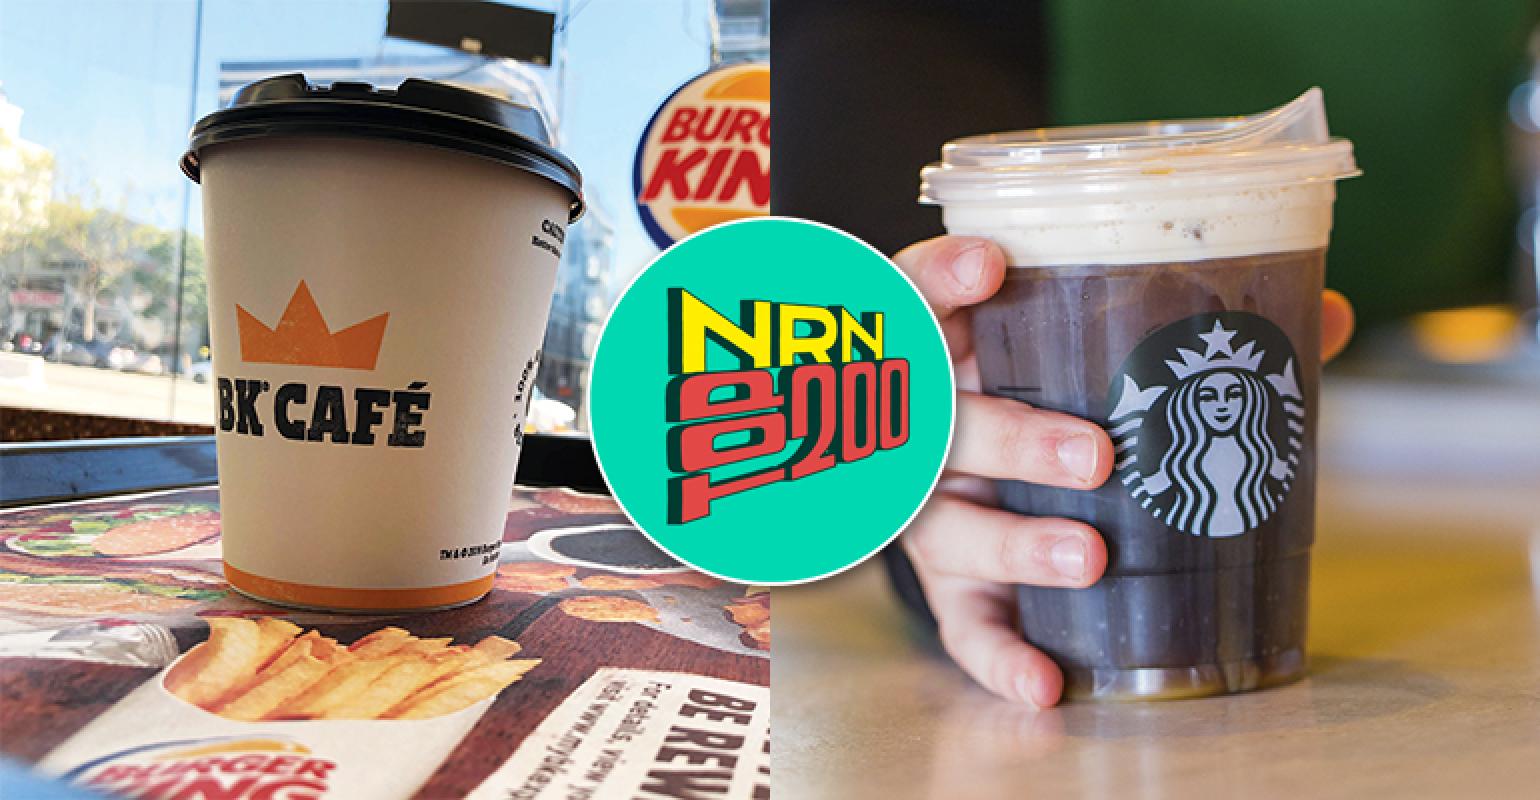 You can get Burger King coffee every day for just $5 a month